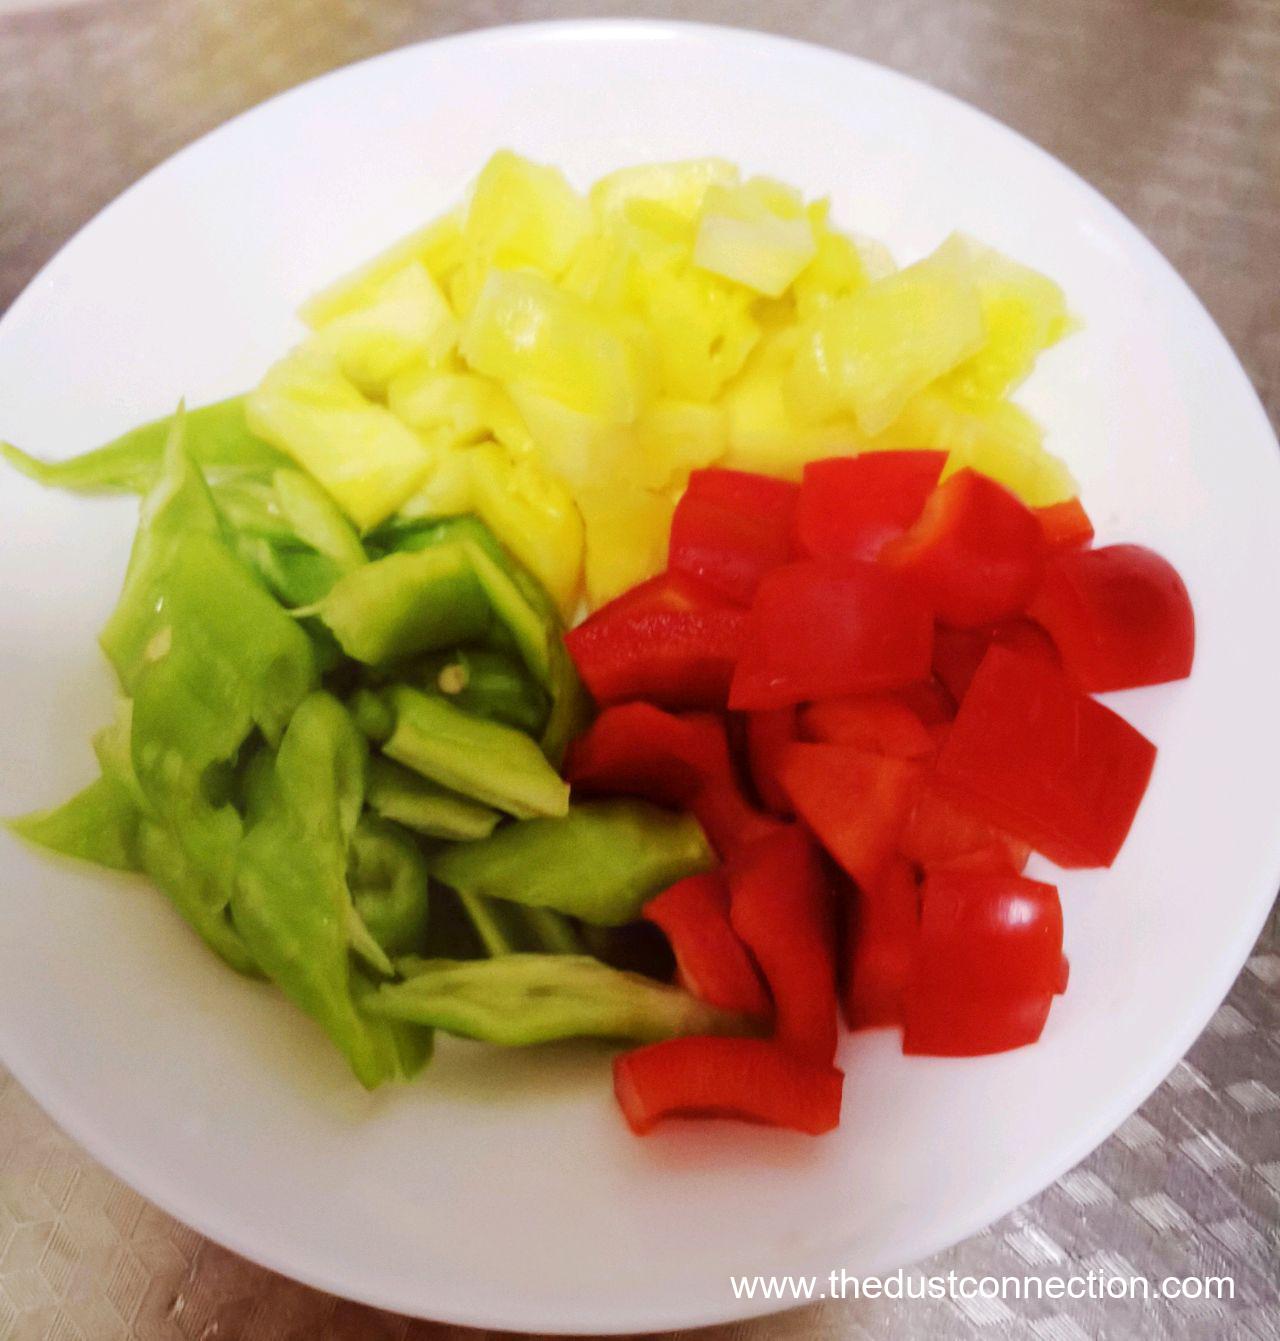 green pepper, red pepper and pineapple